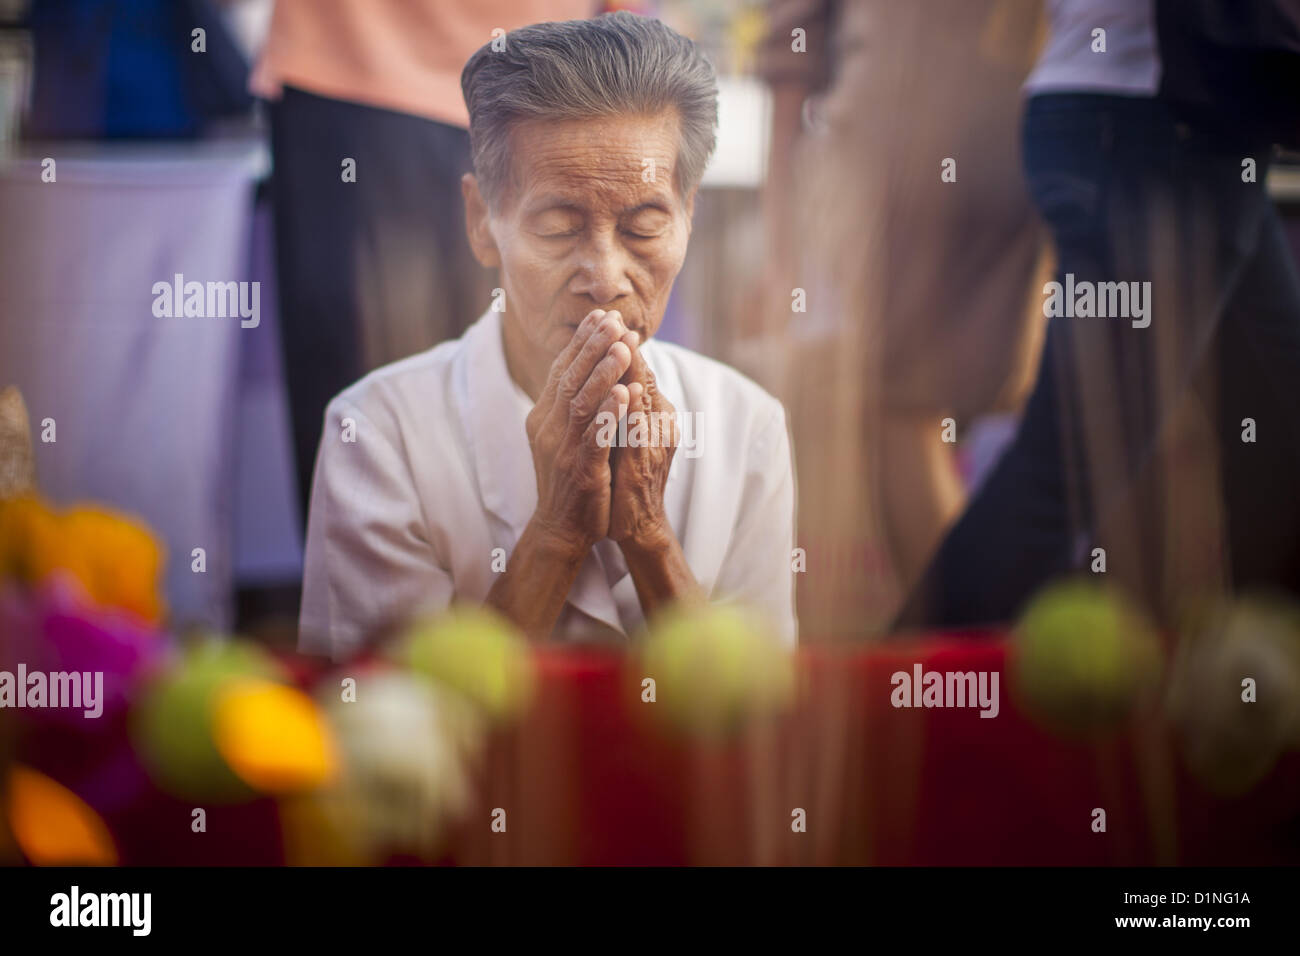 Jan. 1, 2013 - Bangkok, Thailand - A man prays during a special merit making ceremony at Bangkok City Hall New Year's morning. Many Thais go to Buddhist temples and shrines to ''make merit'' for the New Year. The traditional Thai New Year is based on the lunar calender and is celebrated in April, but the Gregorian New Year is celebrated throughout the Kingdom. (Credit Image: © Jack Kurtz/ZUMAPRESS.com) Stock Photo